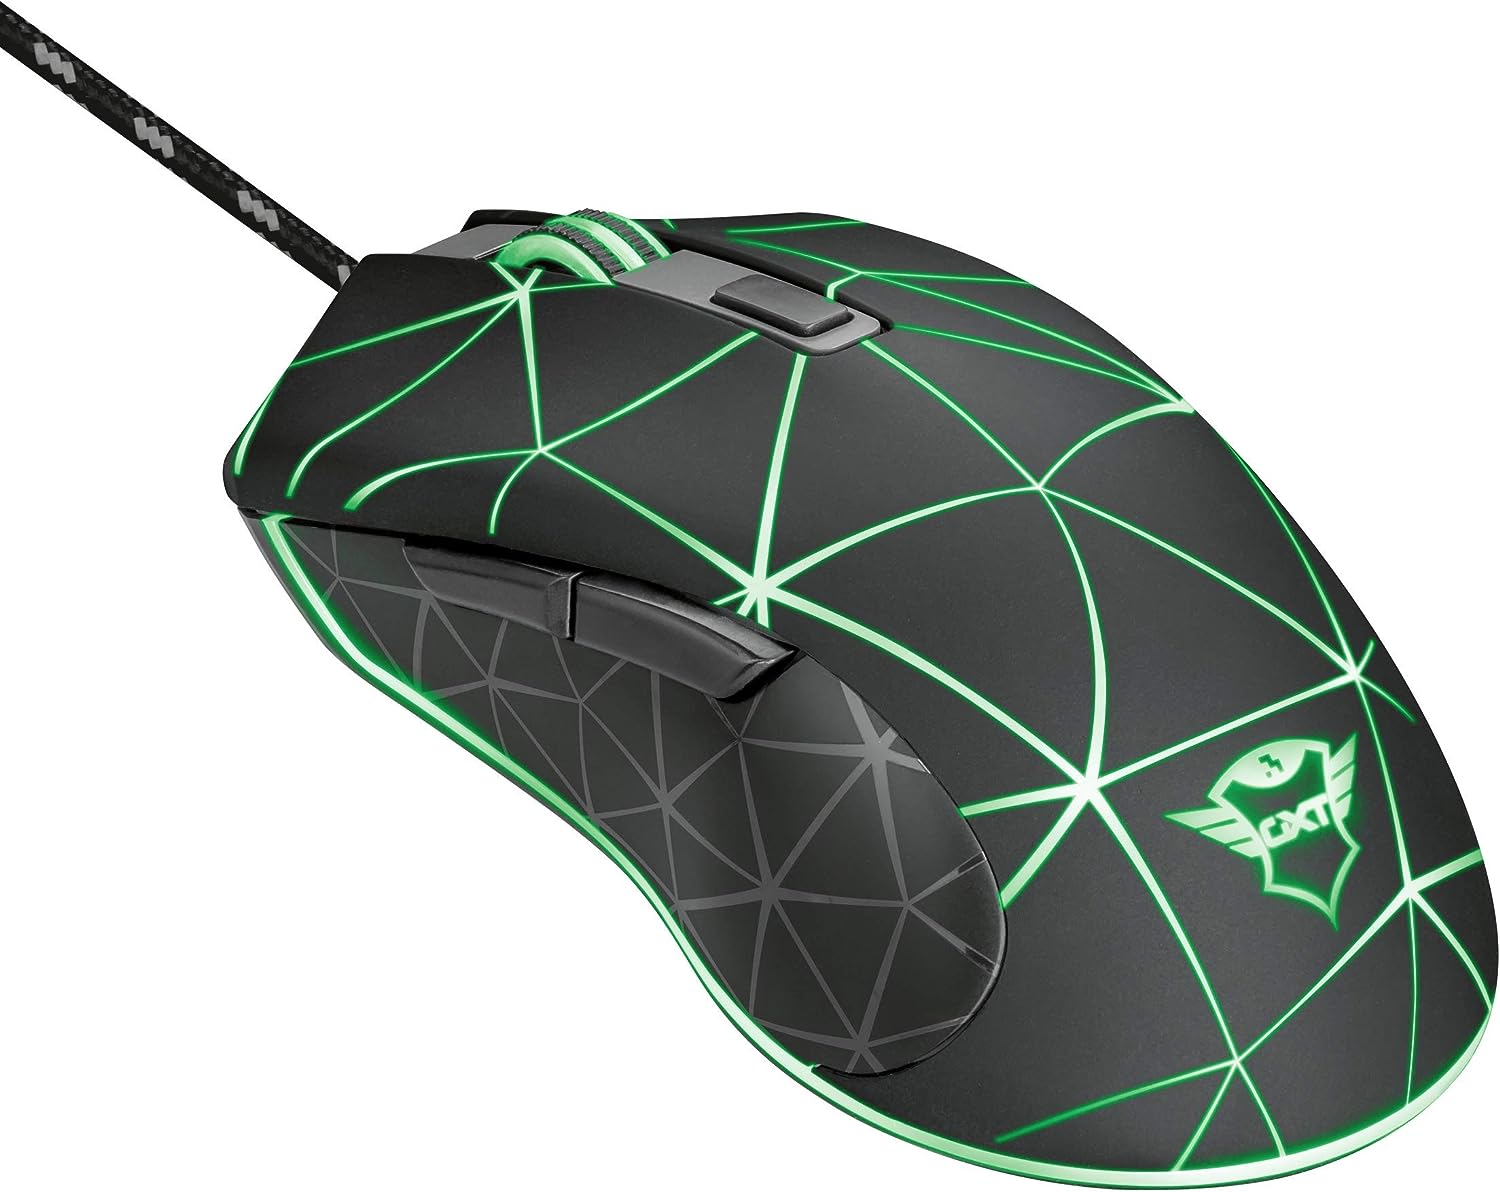 Trust Gaming GXT 133 Locx Mouse gaming Nero